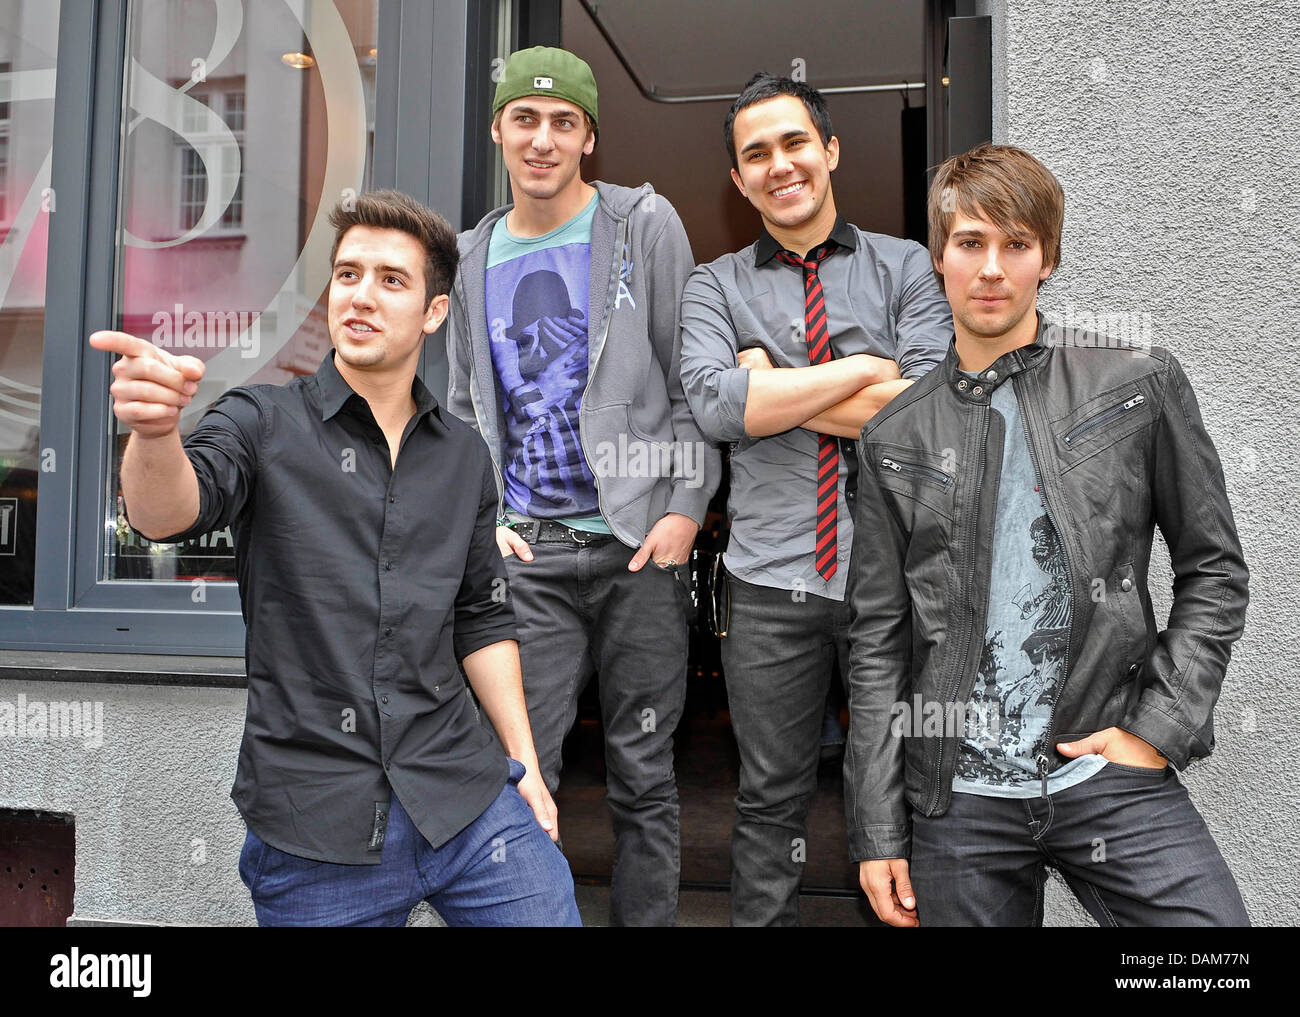 Logan Henderson, Kendall Schmidt, Carlos Pena Jr. and James Maslow (l-r) of the band Big Time Rush pose in Cologne, Germany, 26 May 2011. Big Time Rush will perform during the ceremony for the Comet music prize in Oberhausen, Germany on 27 May 2011. Photo: HENNING KAISER Stock Photo